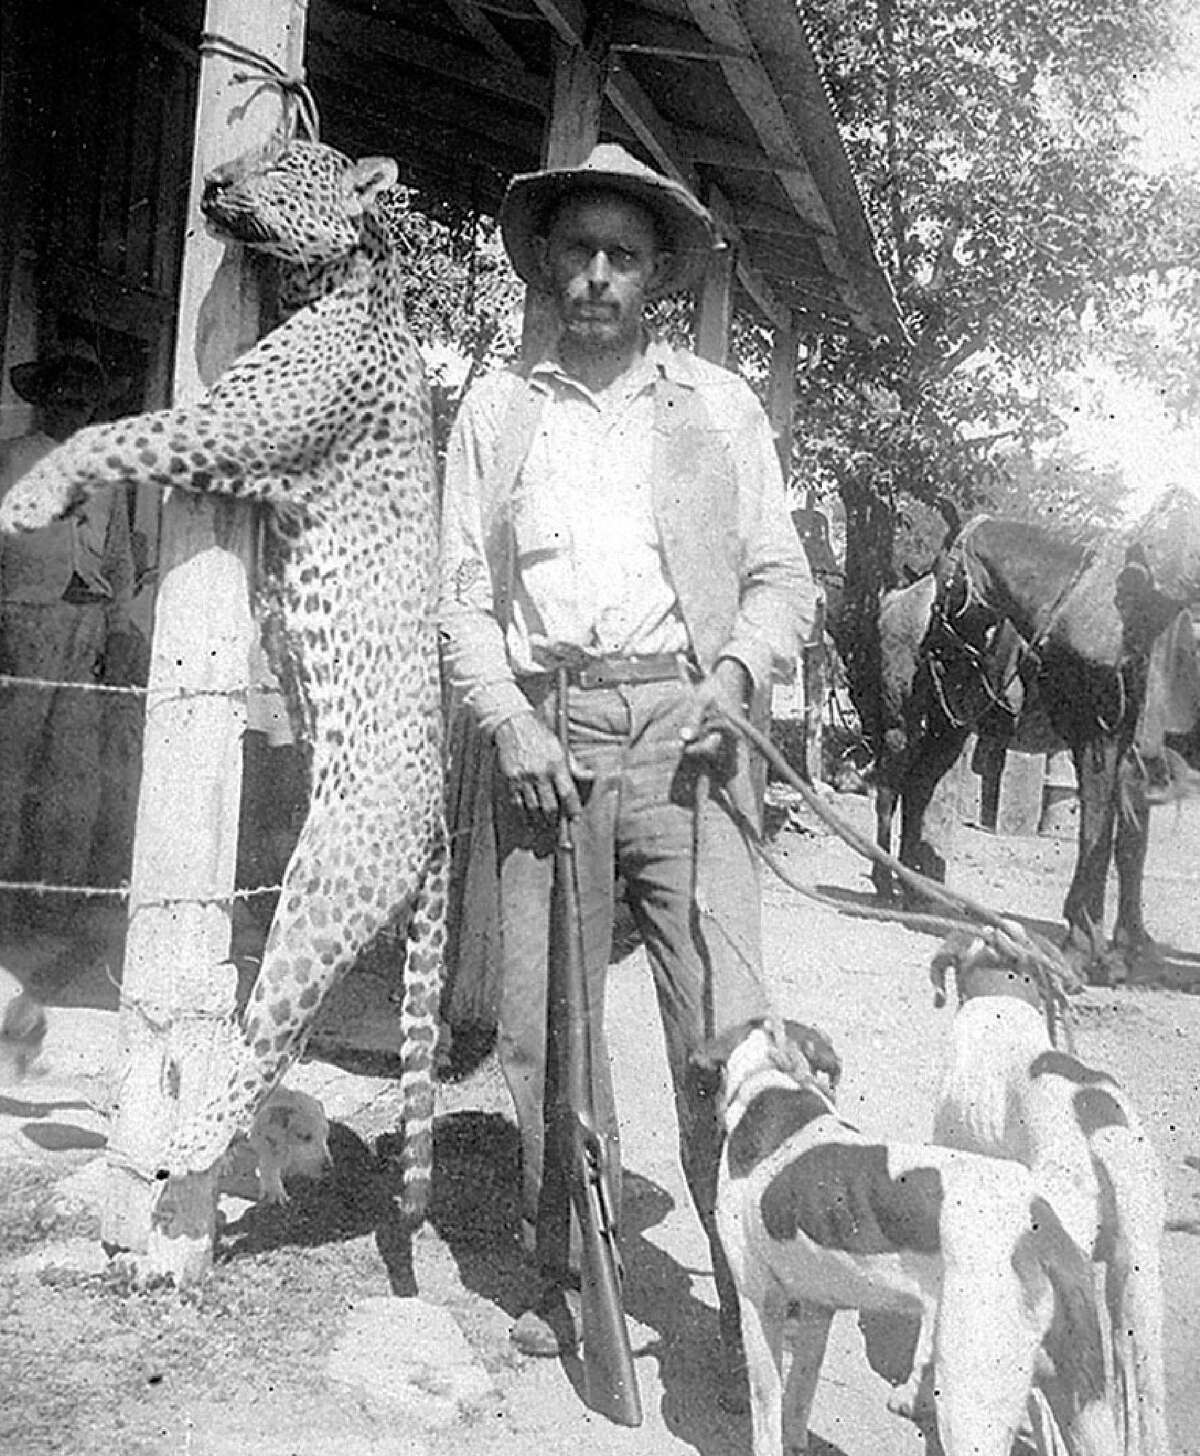 Cecil Thompson and his hunting dogs show off a jaguar they killed in the nearby mountains early in the 20th century. Jaguars and mountain lions preyed on calves and other animals, belonging to the early American colonists in Mexico. Photo Courtesy of Blalock Mexico Colony Project